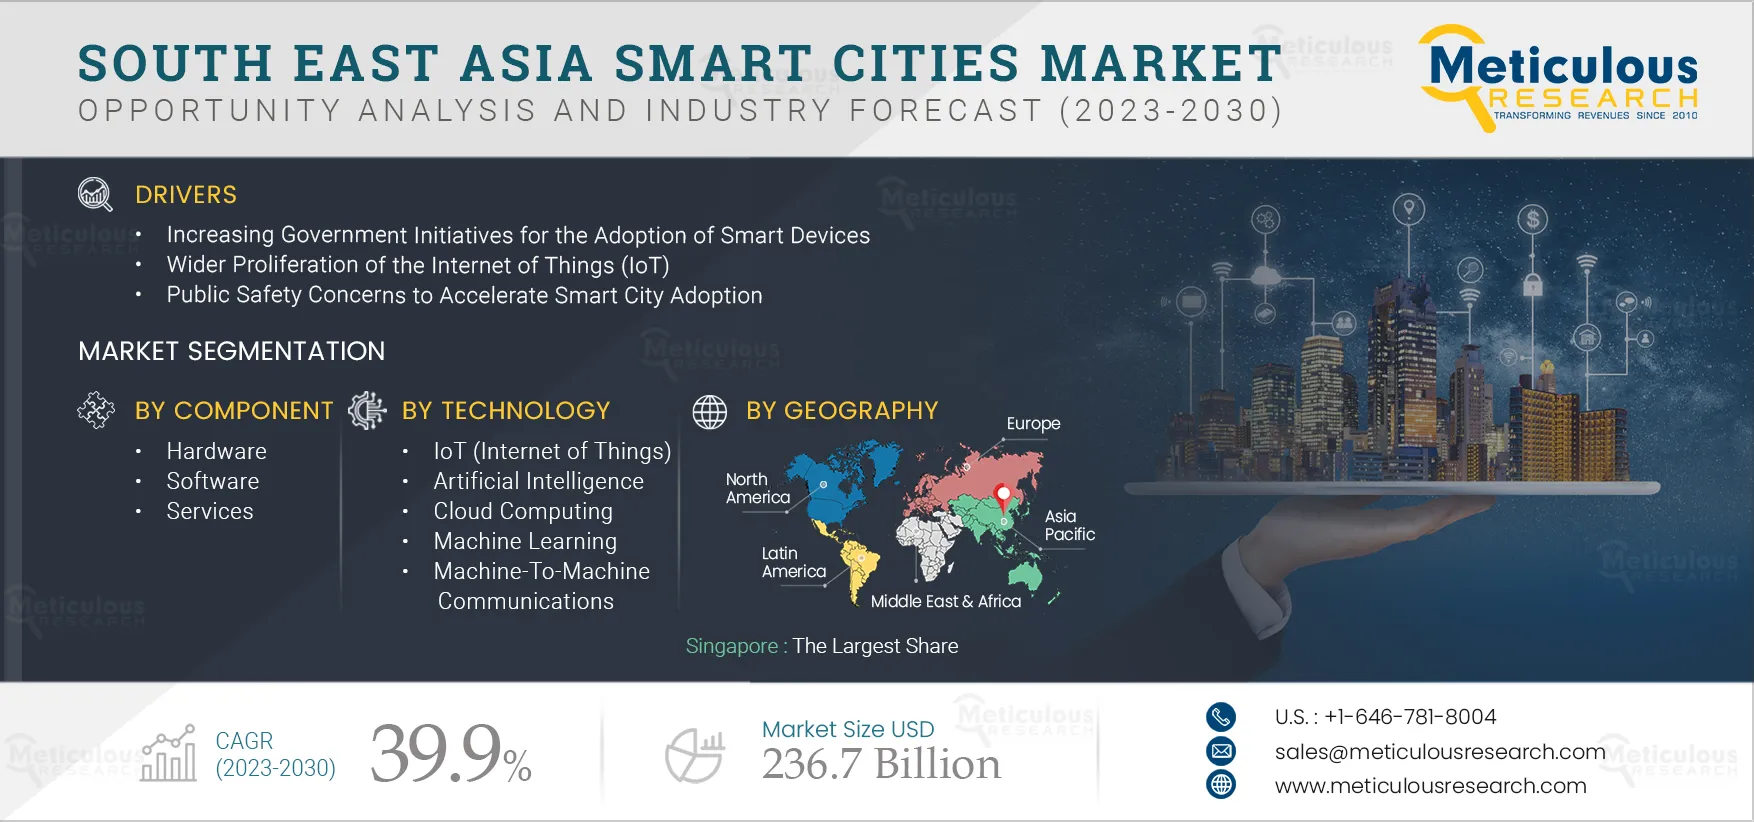 South East Asia Smart Cities Market